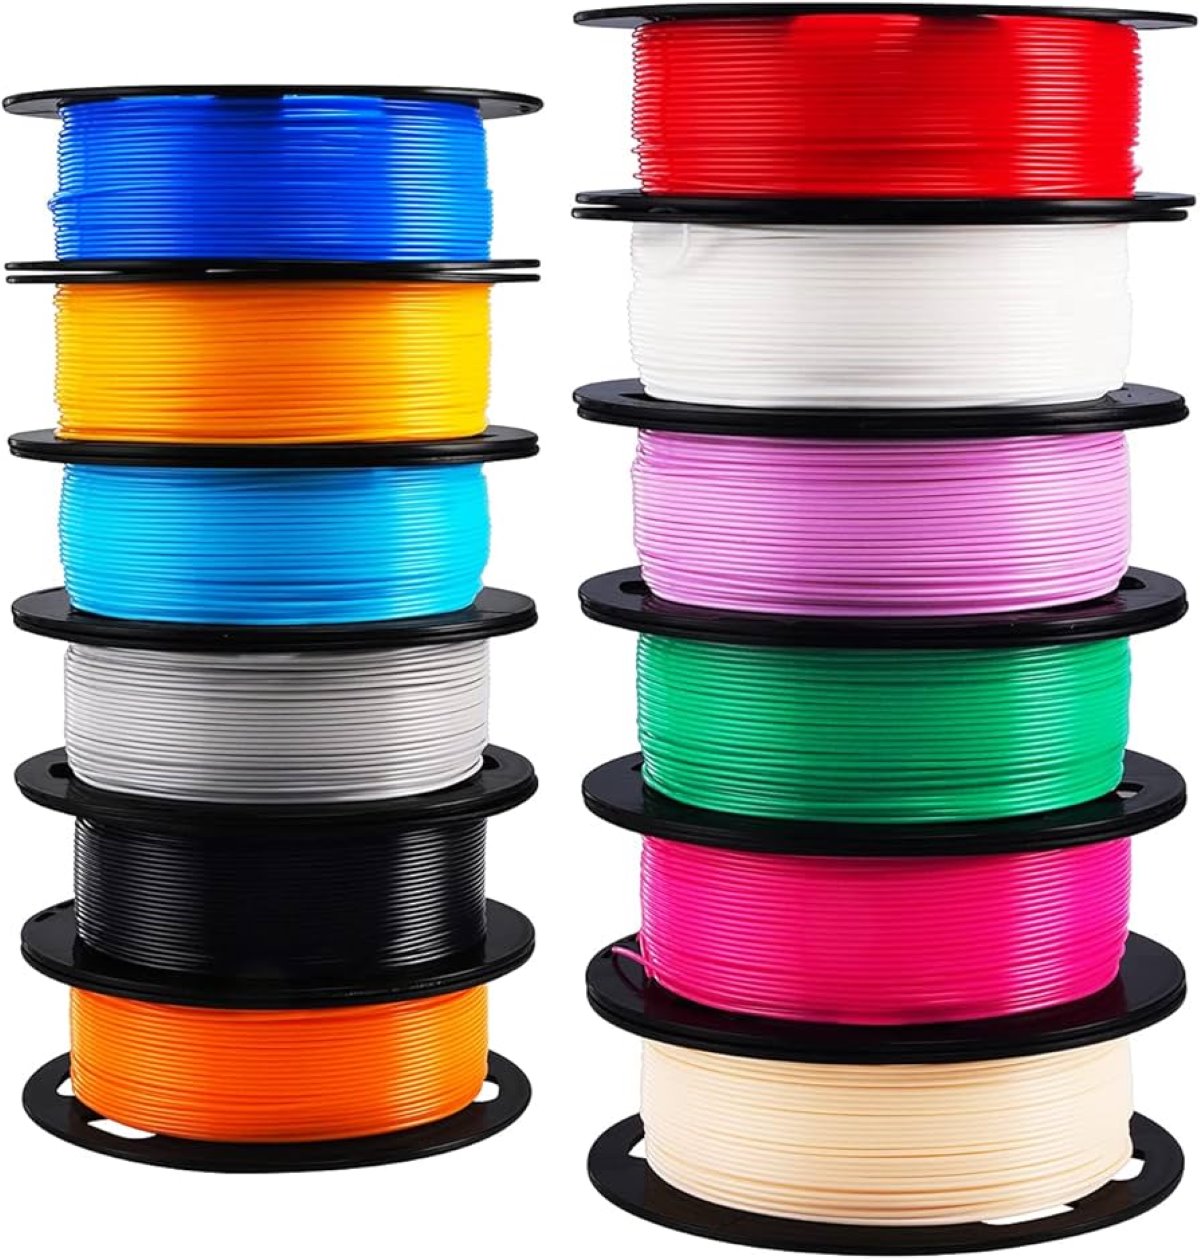 How To Store Pla Filament